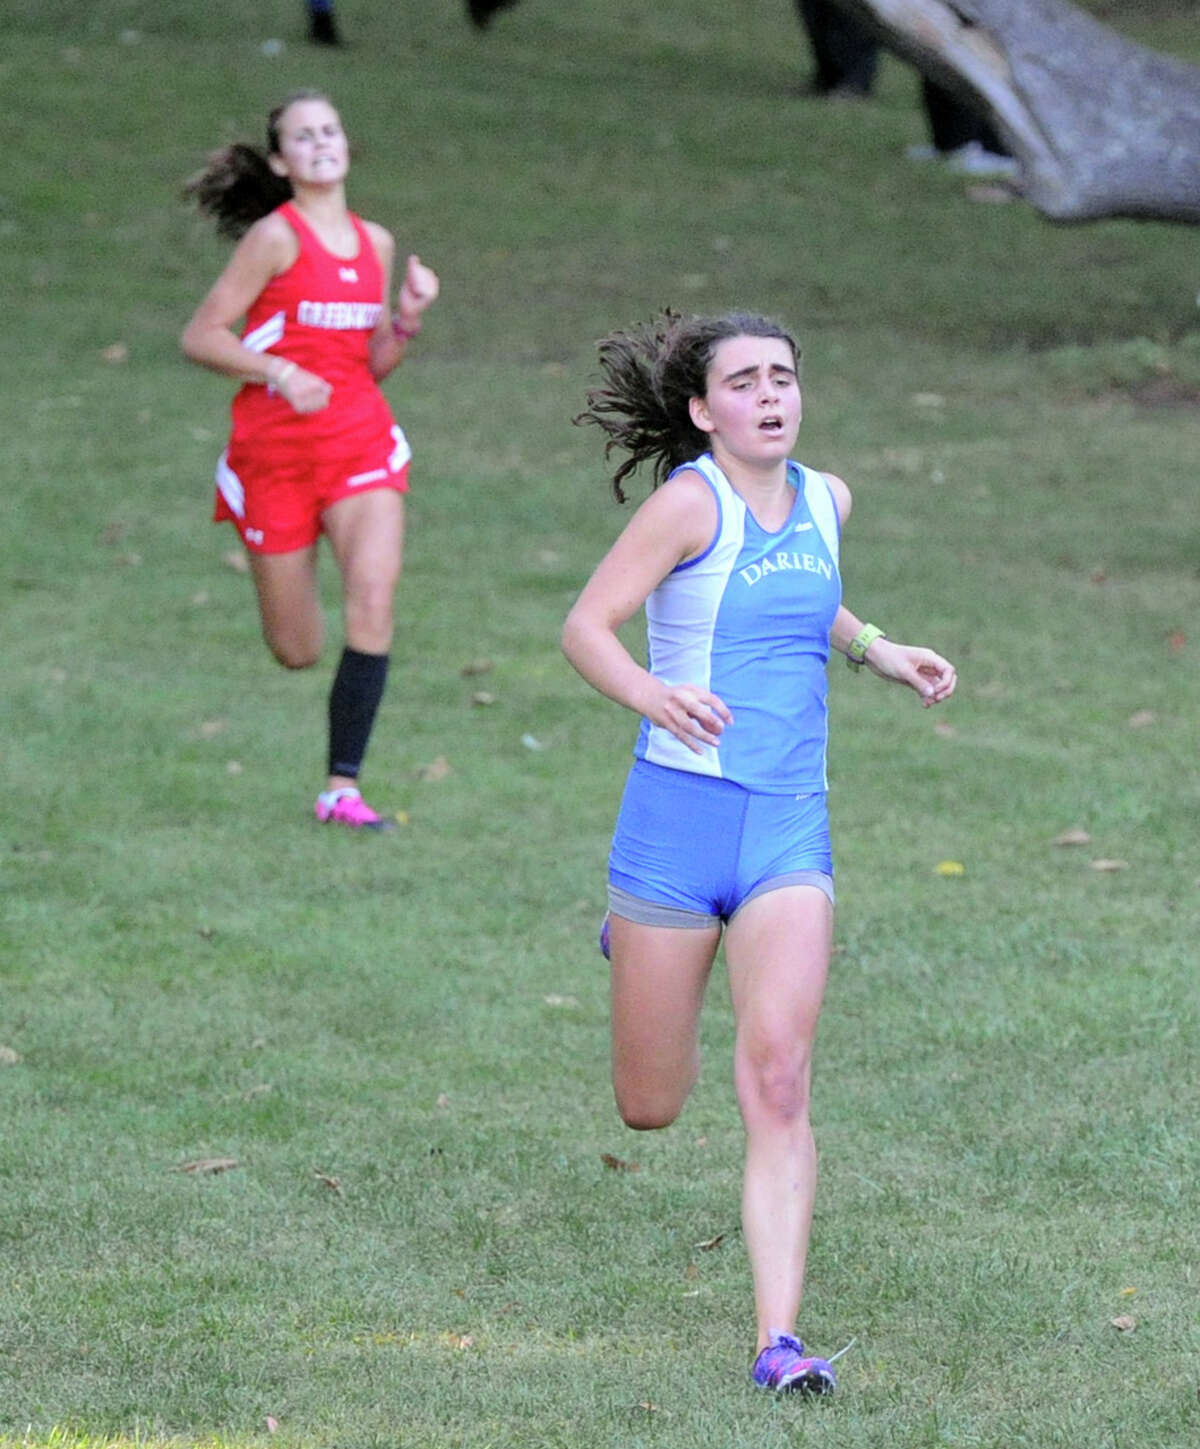 At right, Darien's Sarah LeHan came in second during the girls high school cross country meet at Greenwich Point, Greenwich, Conn., Tuesday, Oct. 6, 2015.